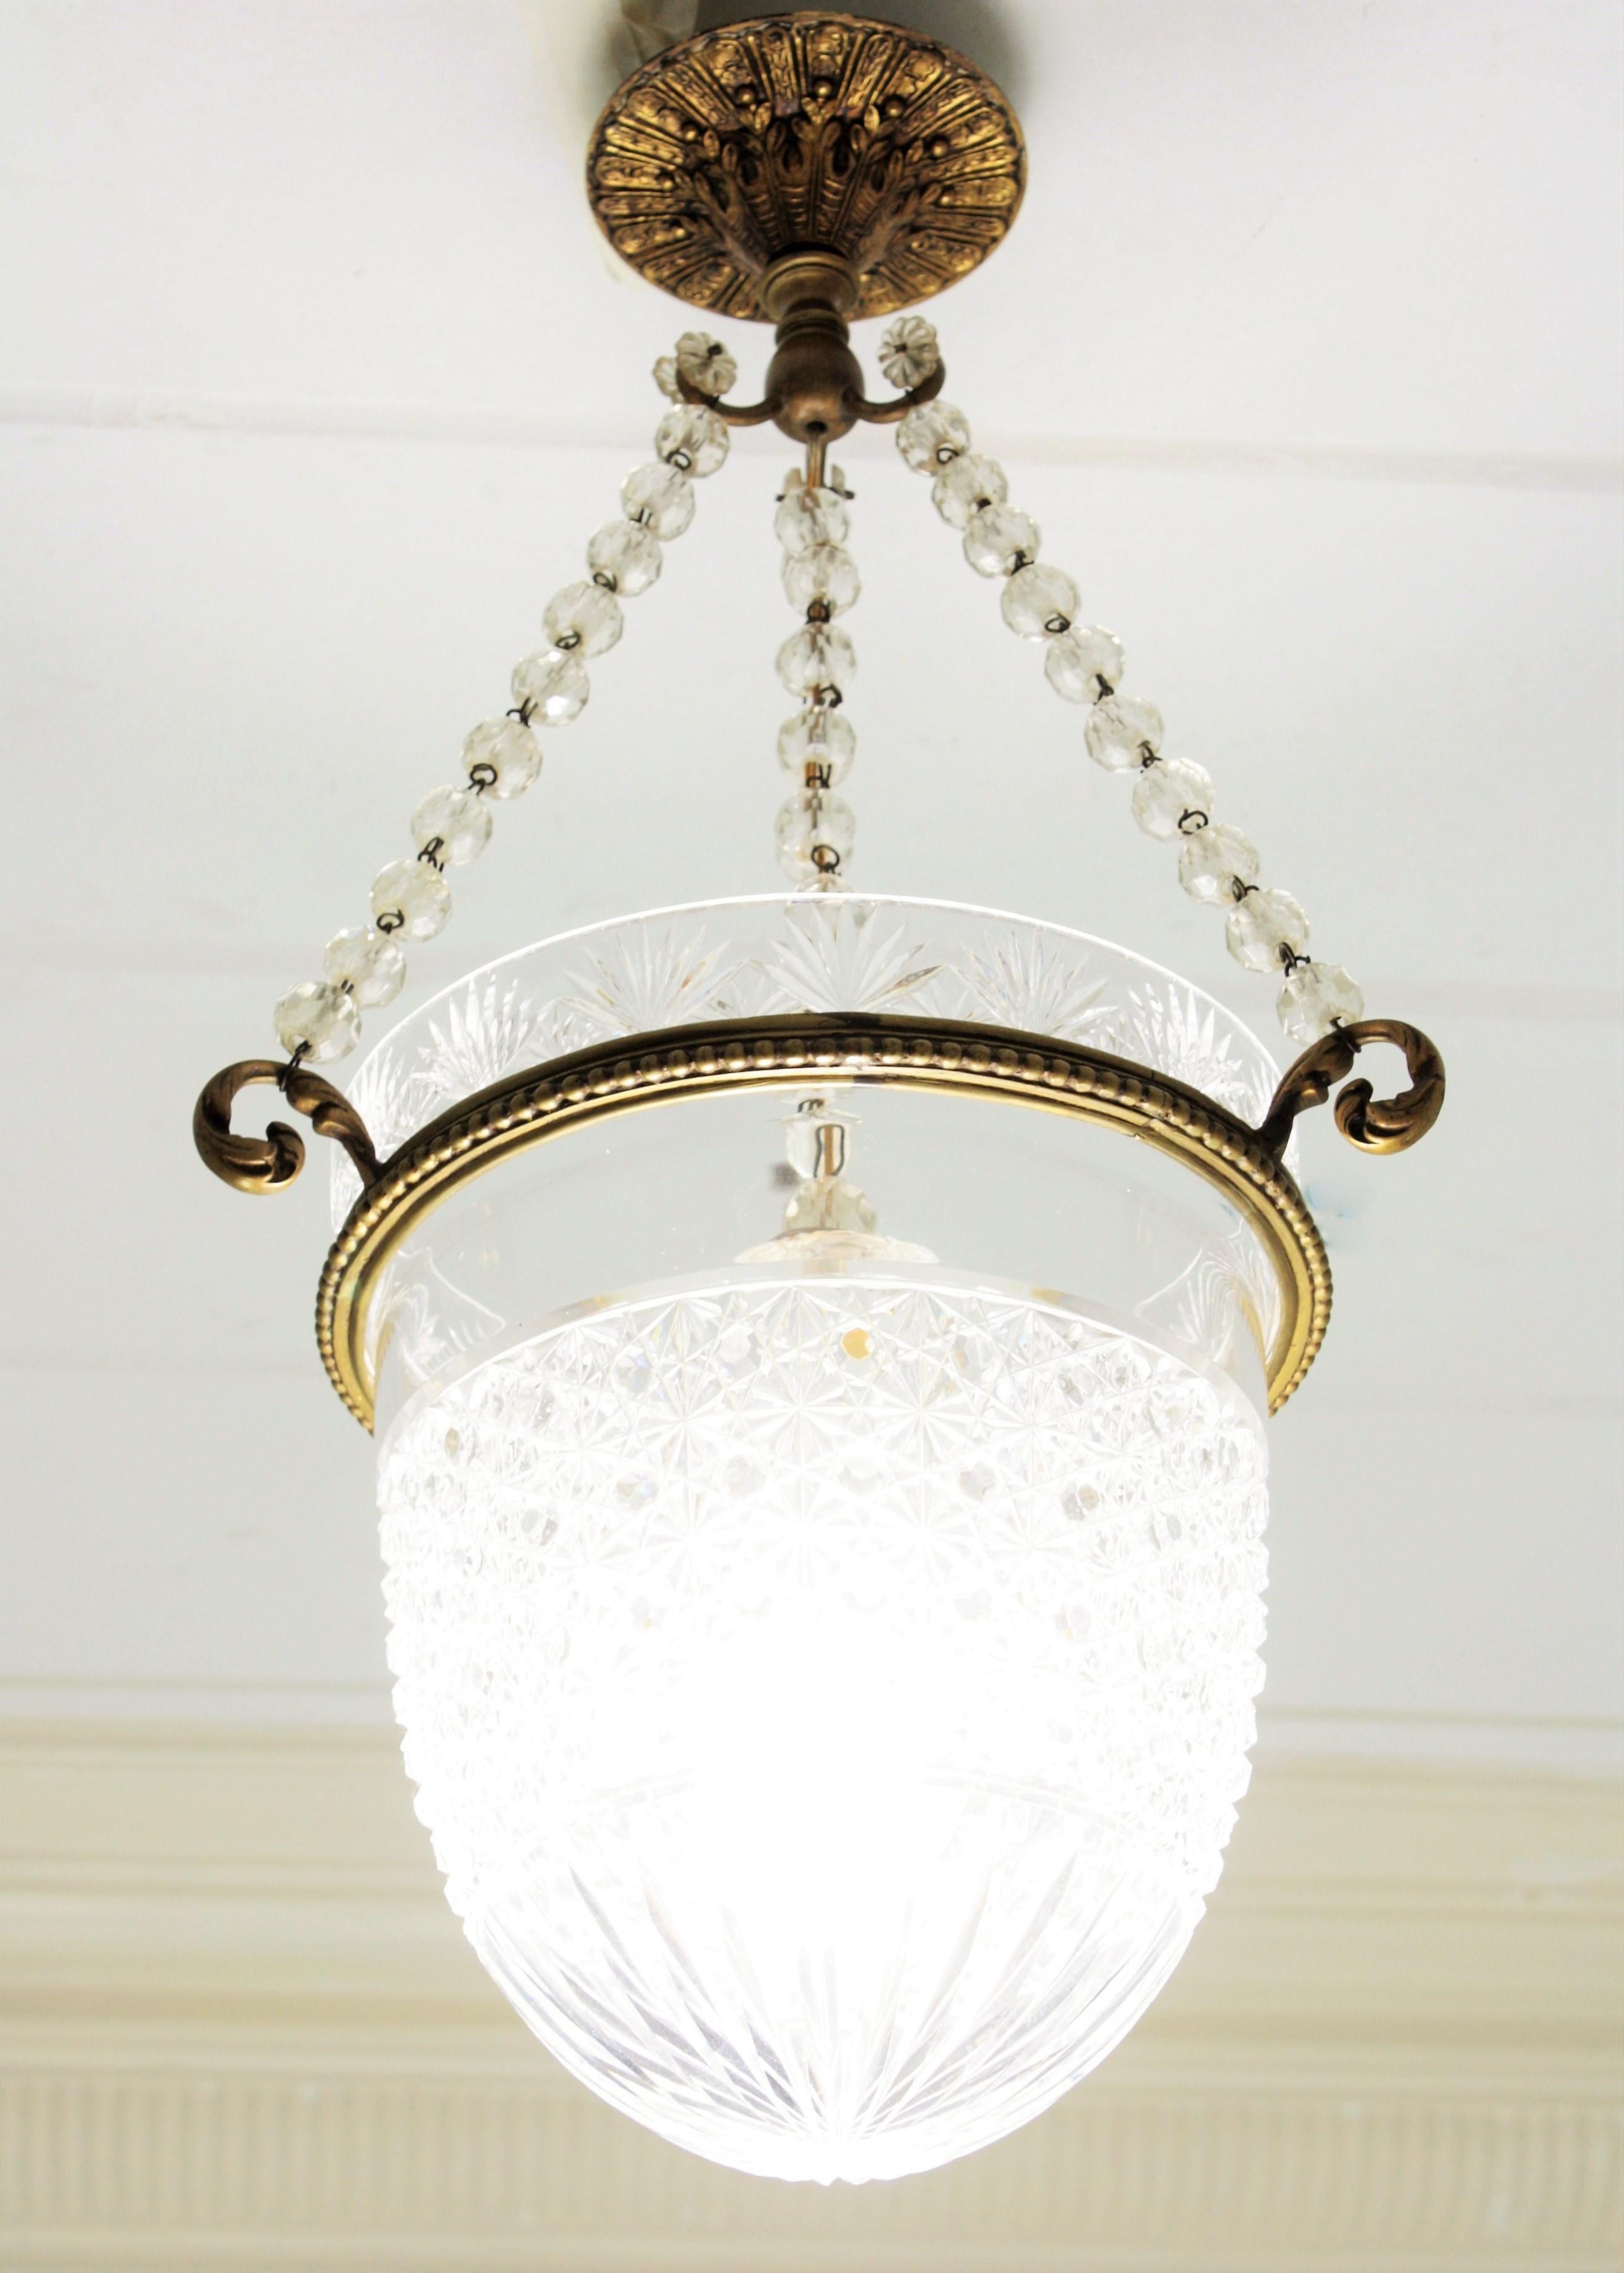 Empire Bohemian crystal and bronze bell jar pendant hanging light or chandelier. Czech Republic, 1920s-1930s
This elegant hanging light or pendant has a bell in Classic form and featuring bronze leafed scrolled ending hooks. The crystal bell shade